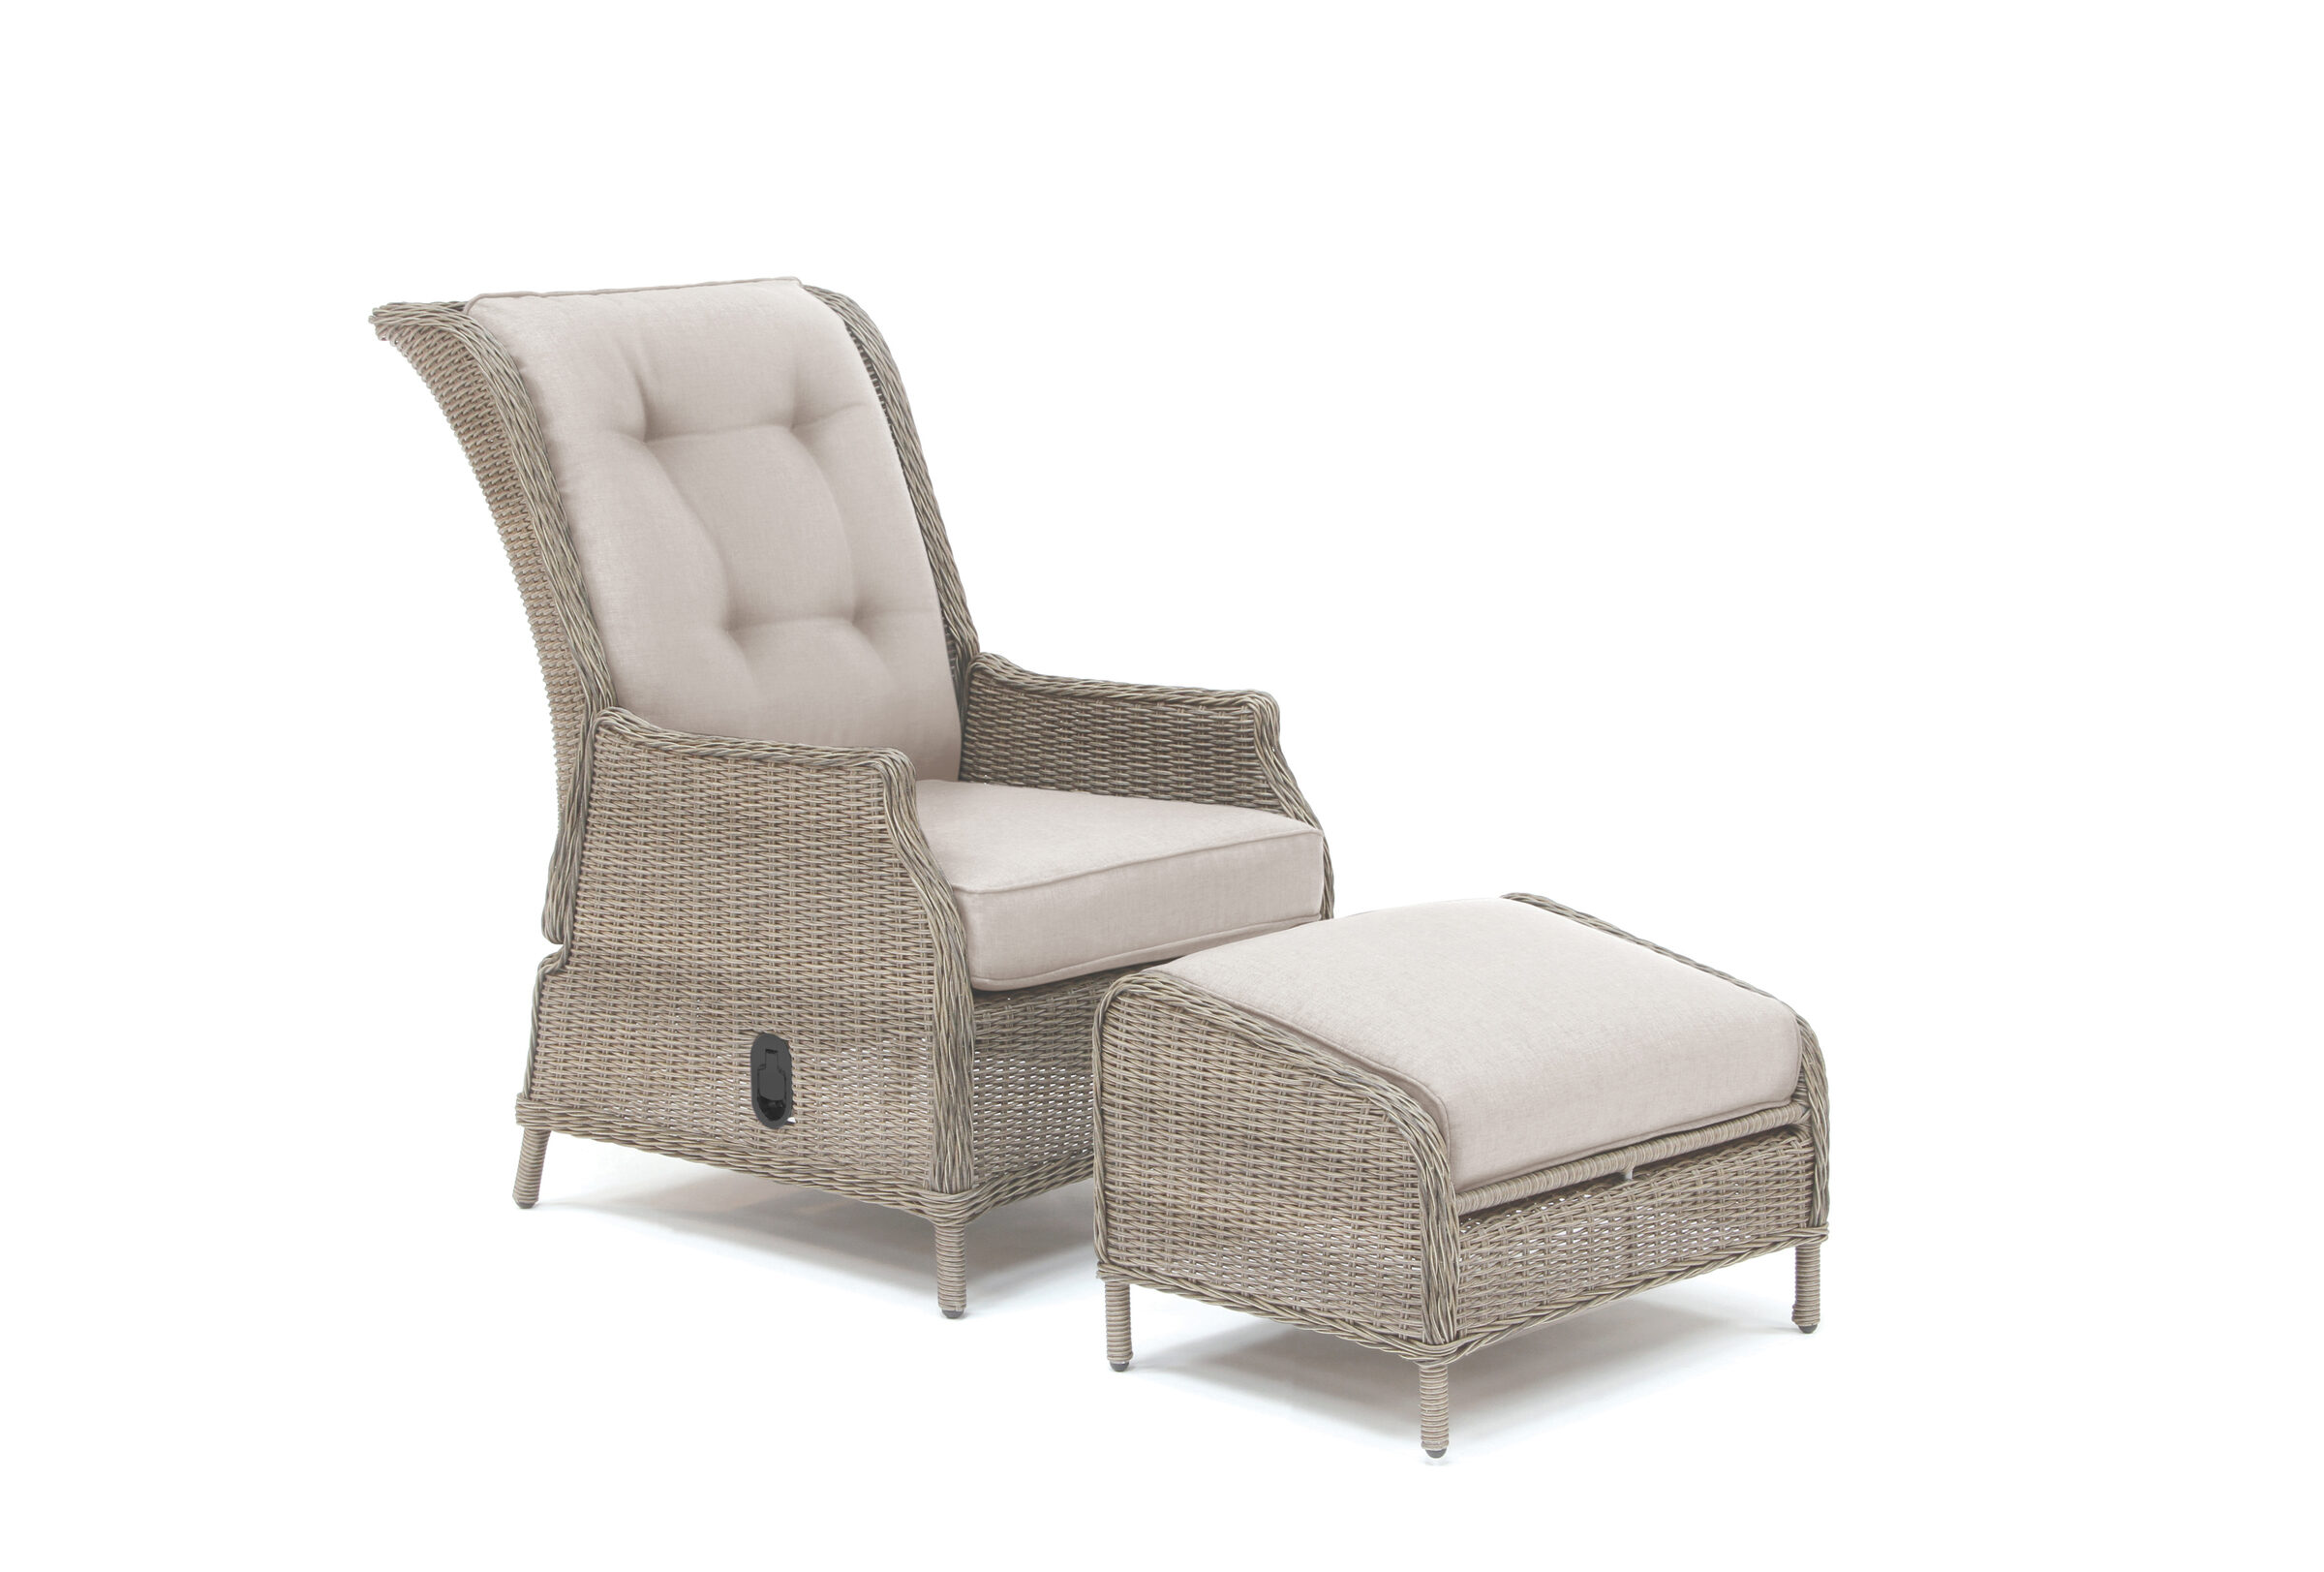 Palma Classic Recliner Oyster